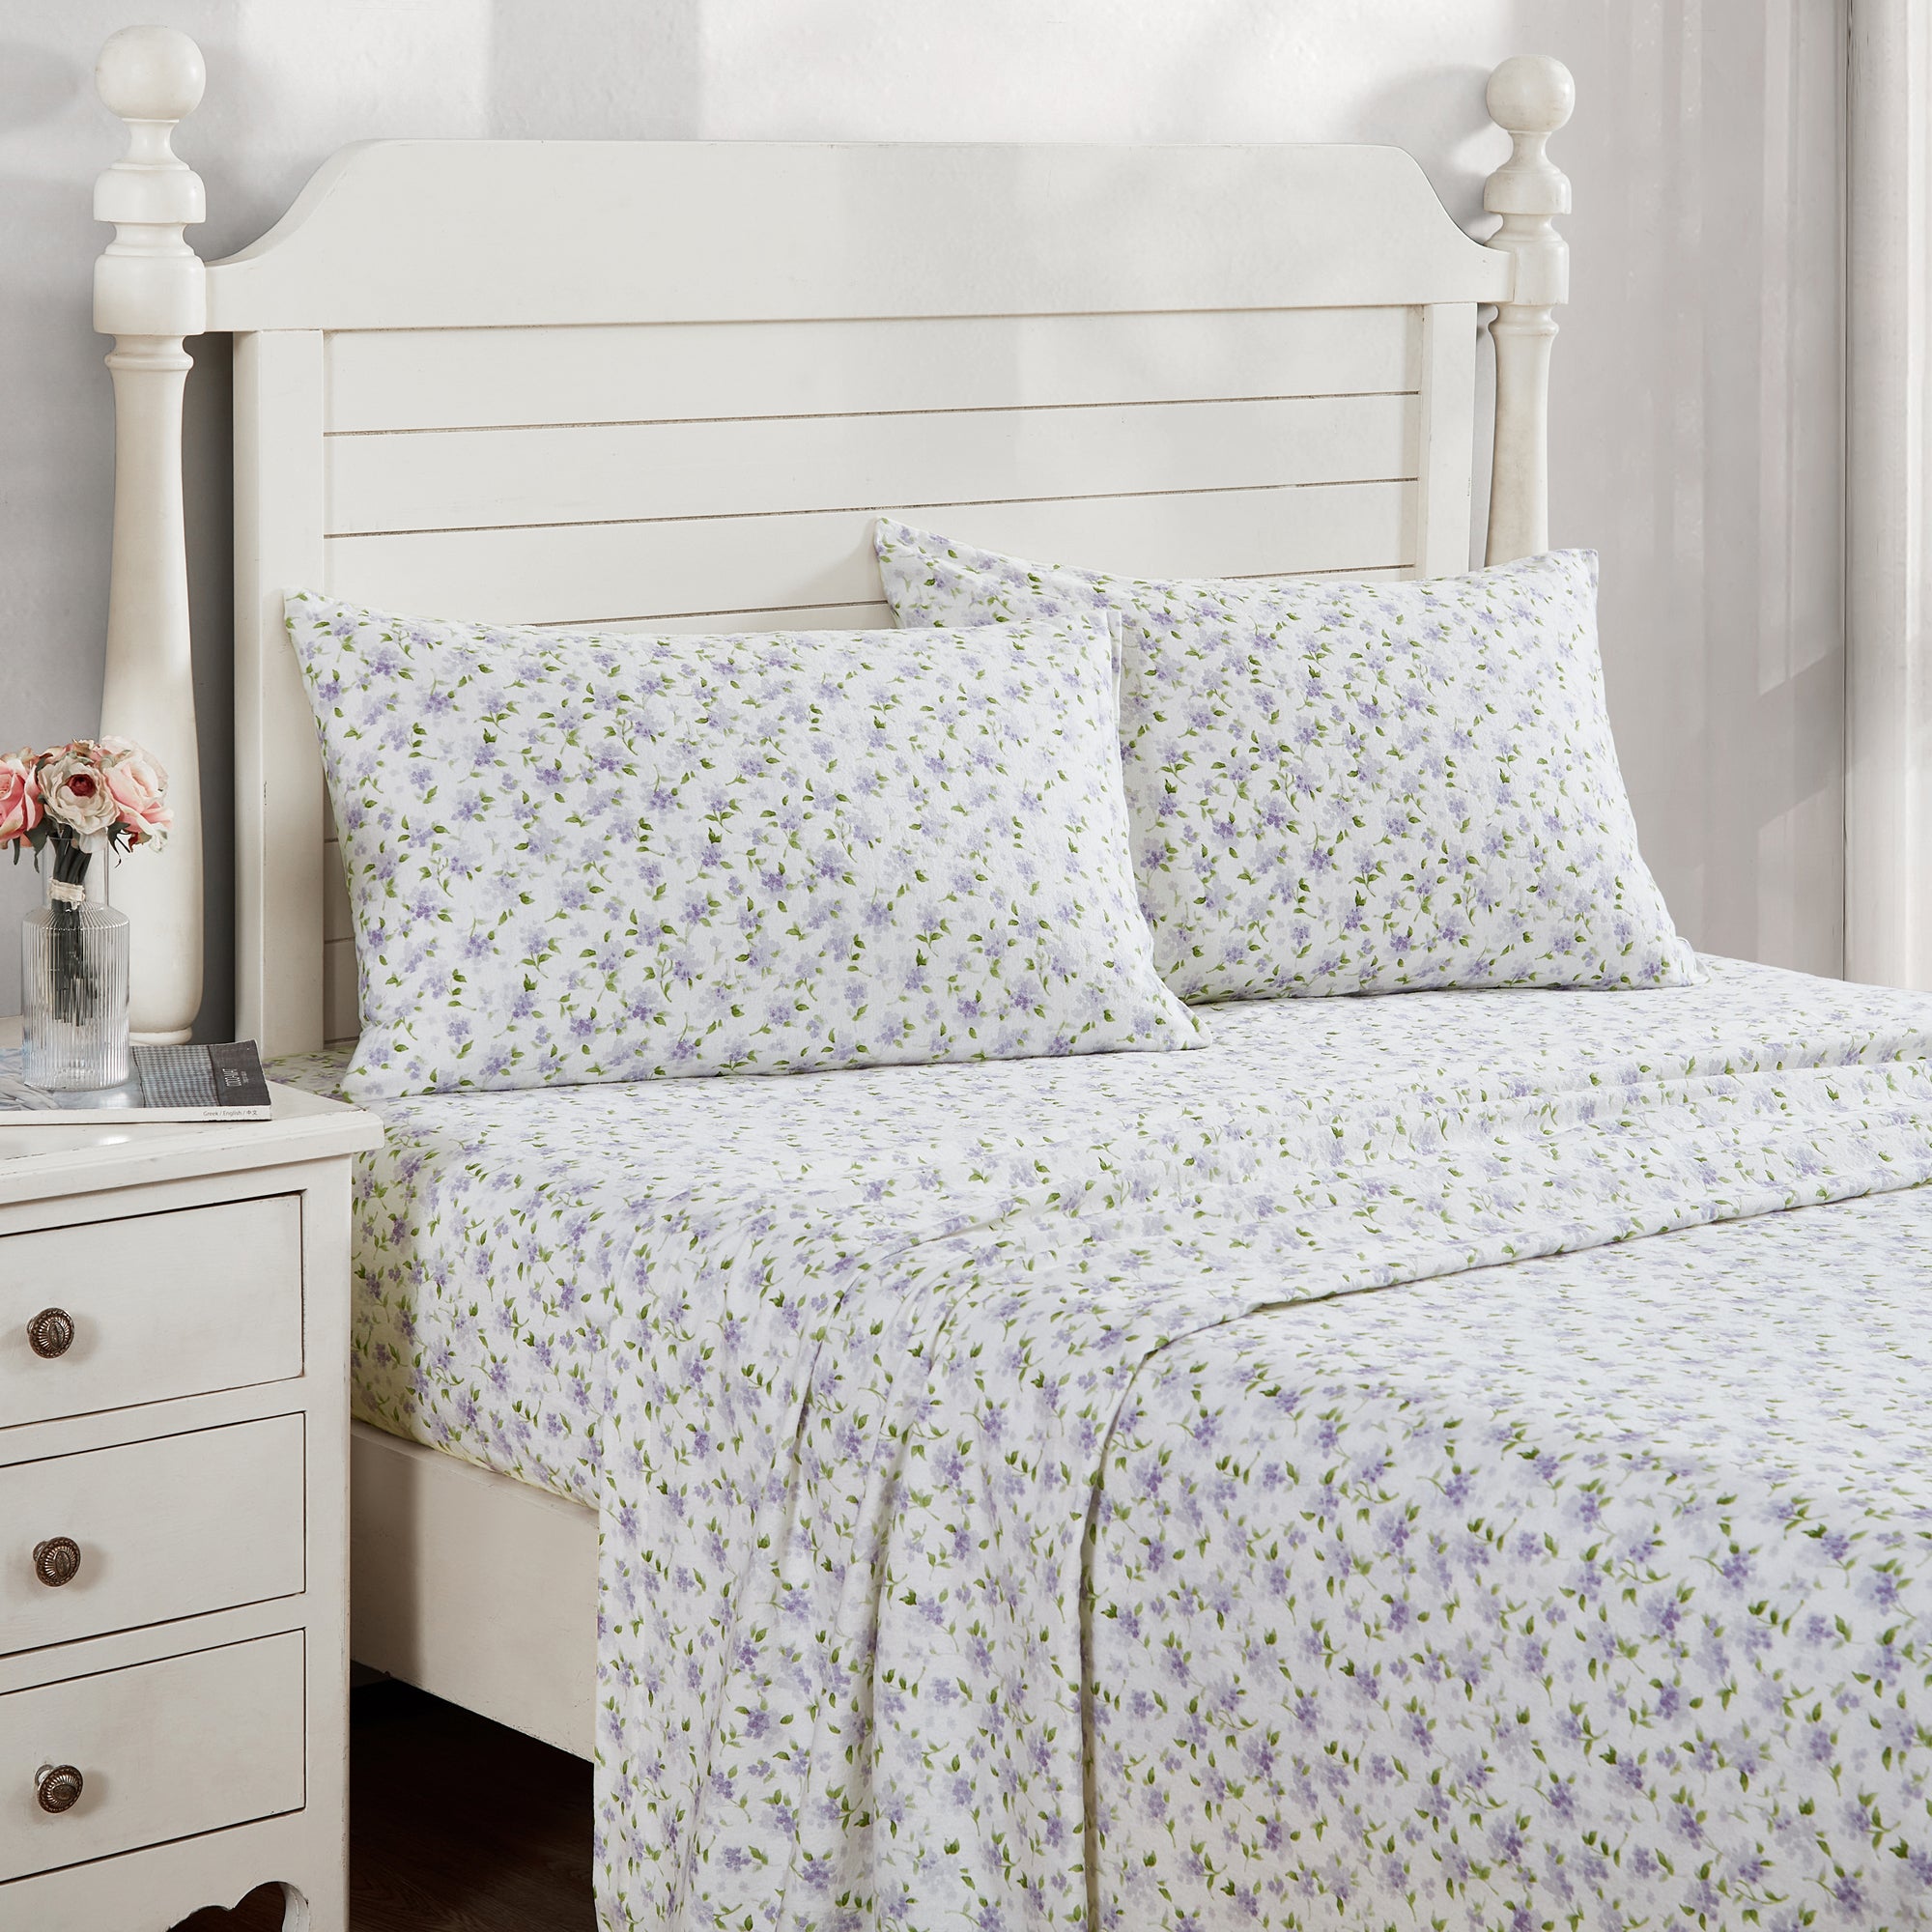 This luxuriously soft Laura Ashley Virginia Cotton Flannelette Sheet Set boasts a beautiful lilac floral design. Expertly crafted from premium cotton, this set promises a comfortable night's sleep with added warmth and style. The perfect choice for a peaceful bedroom oasis.